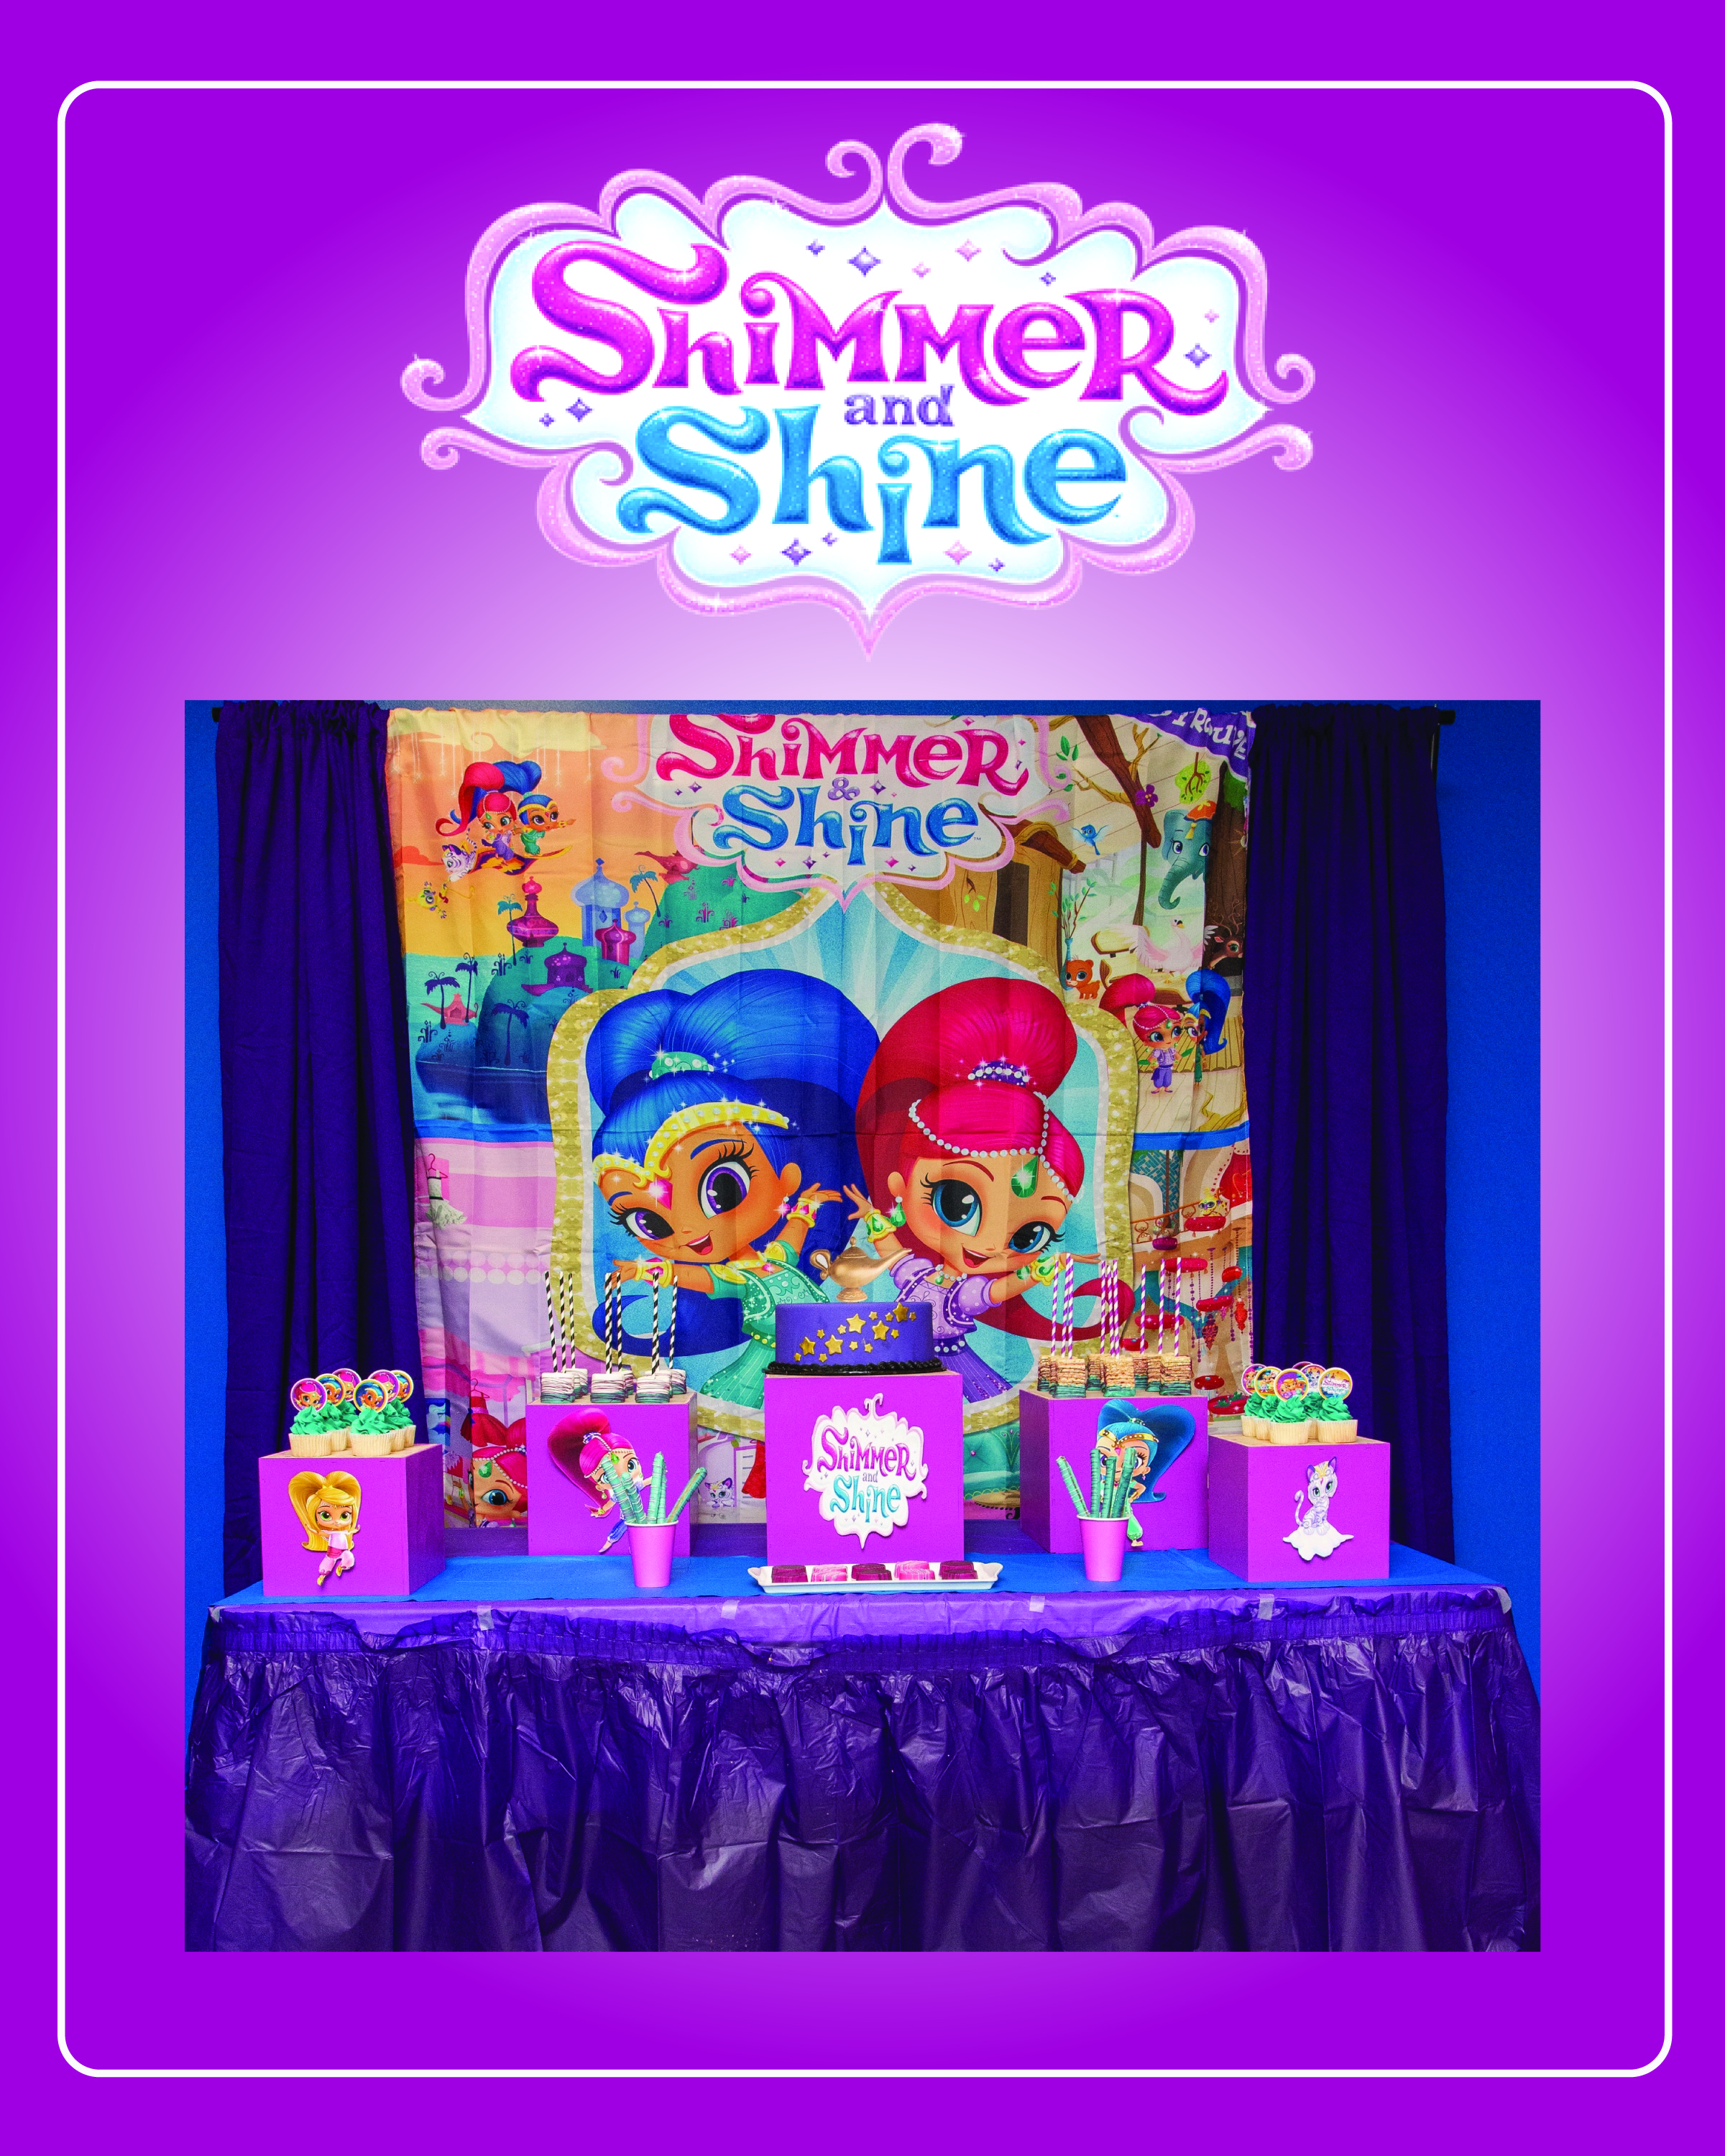 A Shimmer and Shine Birthday Party